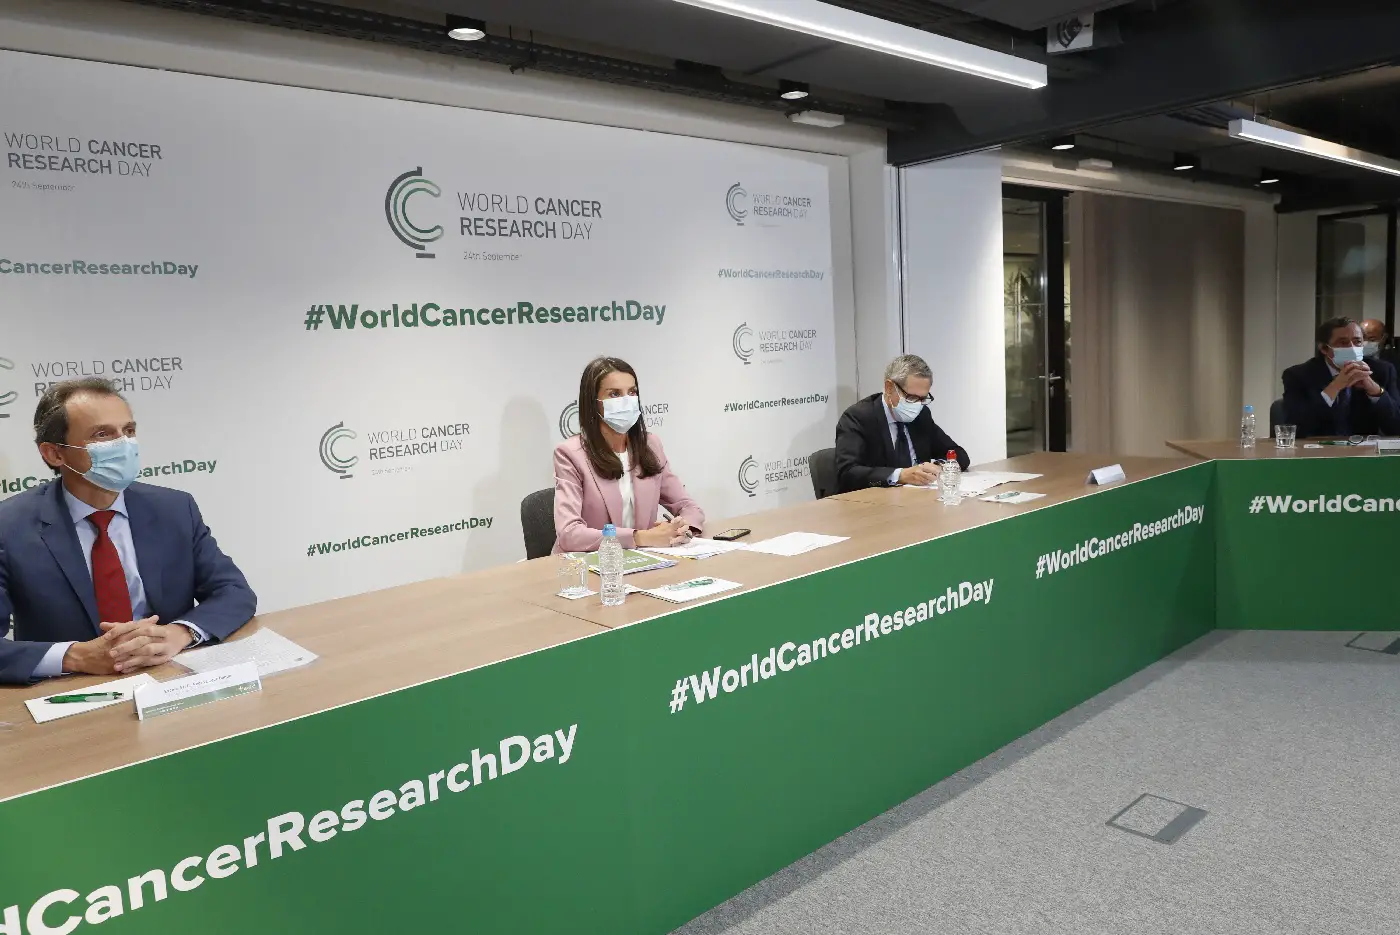 Queen Letizia attended Wrold Cancer Research Day event